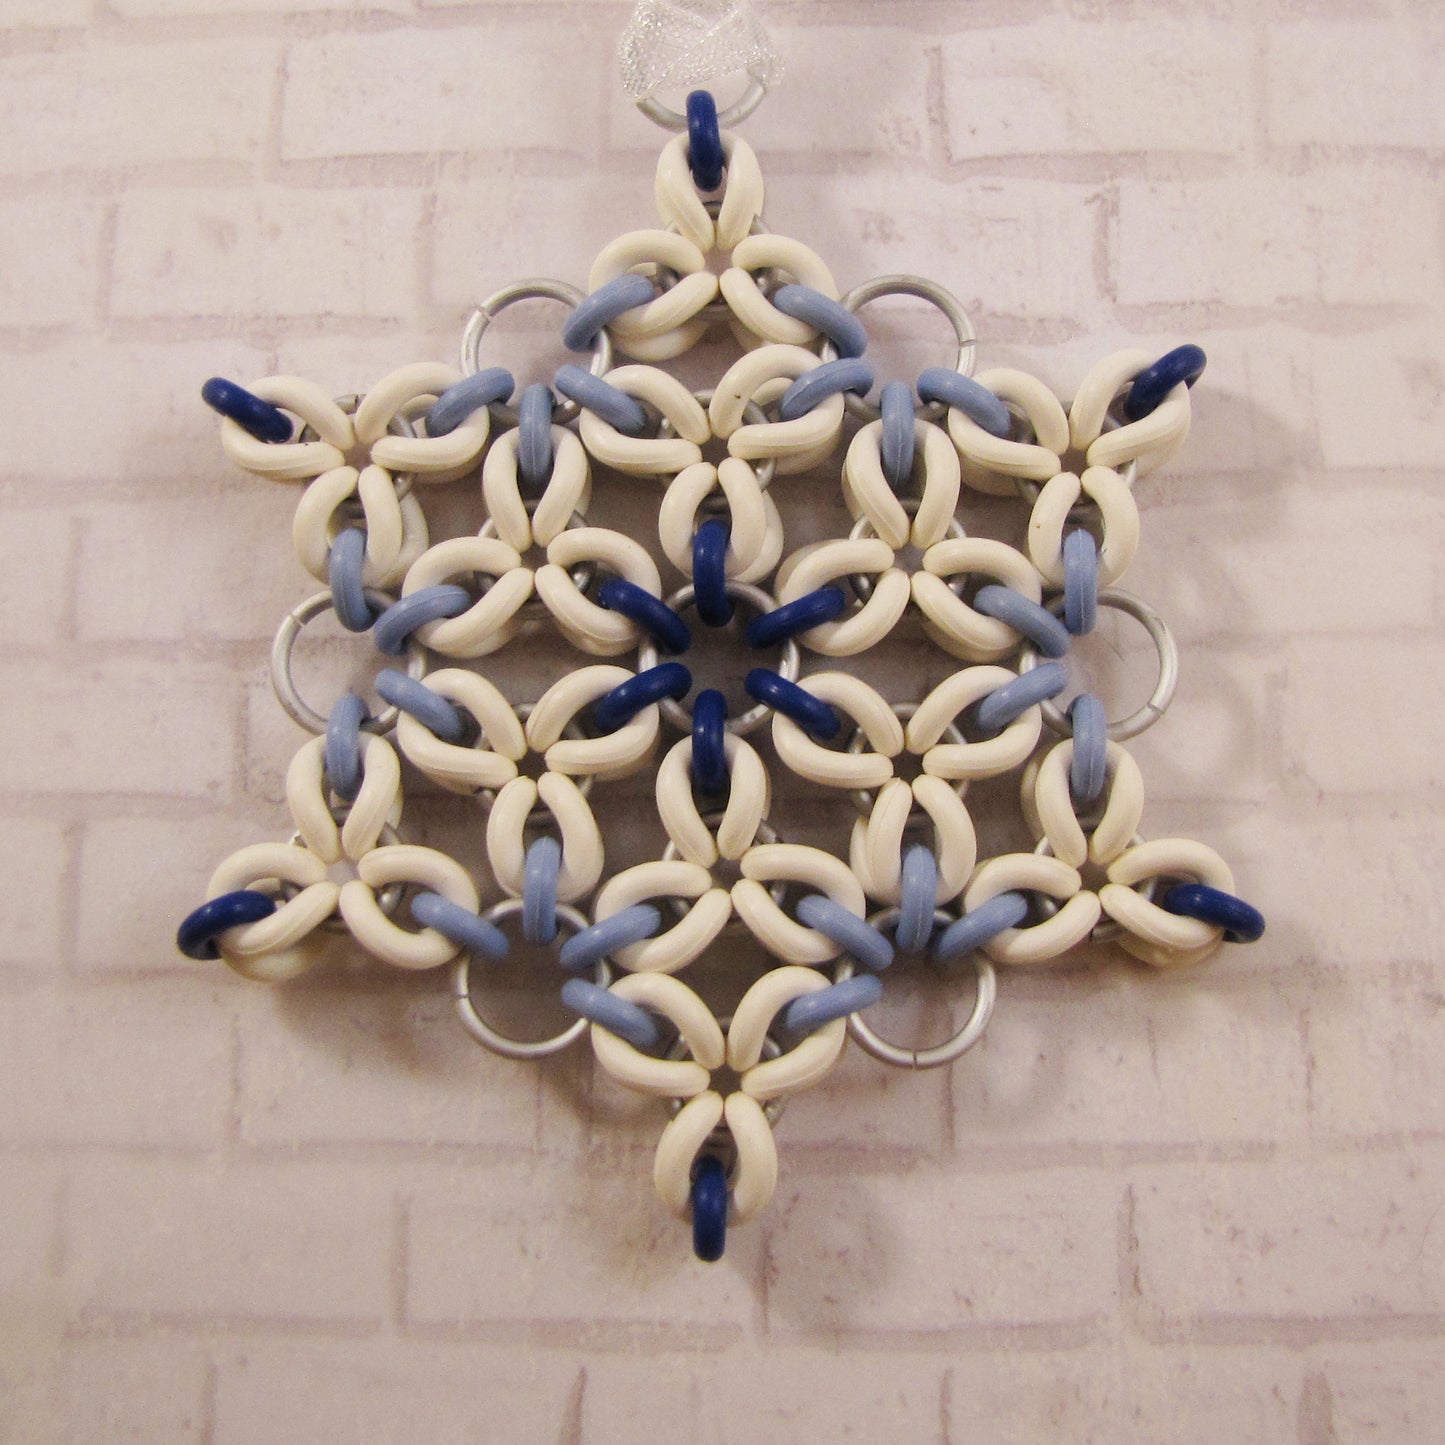 Snowflake Tri Flower Ornament Kit with FREE Video - White with Celestial and Powder Blue